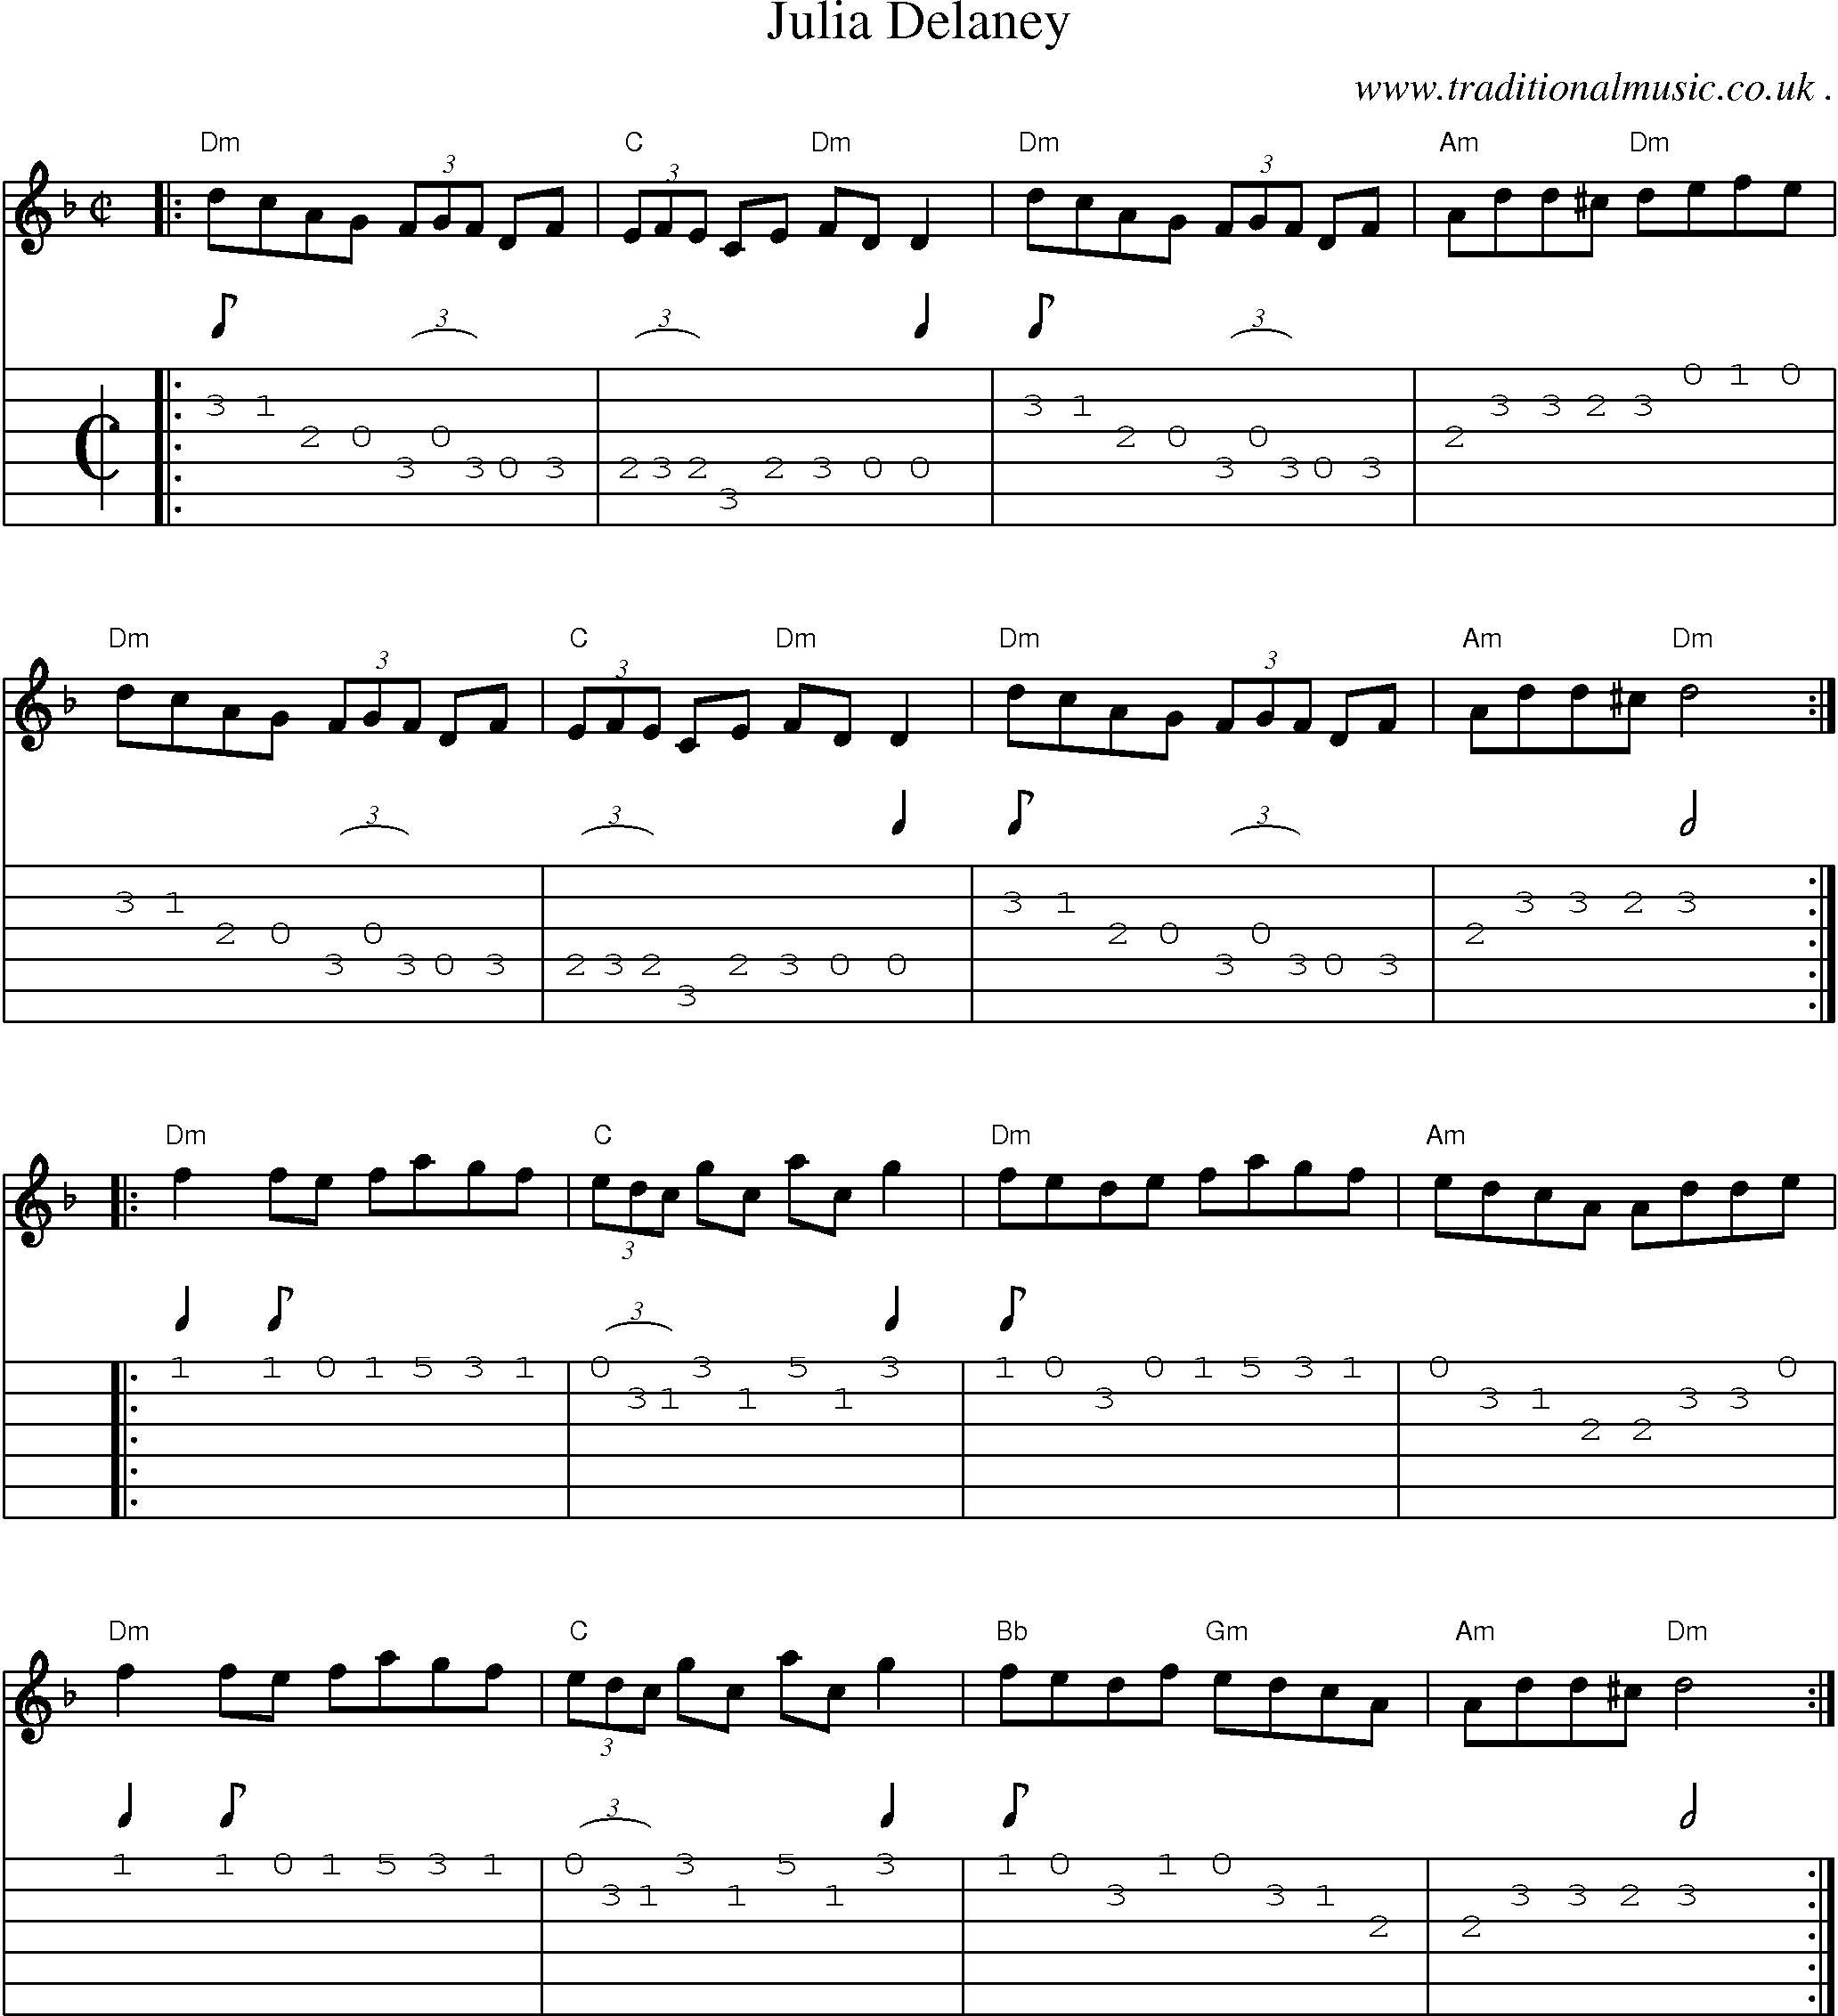 Music Score and Guitar Tabs for Julia Delaney